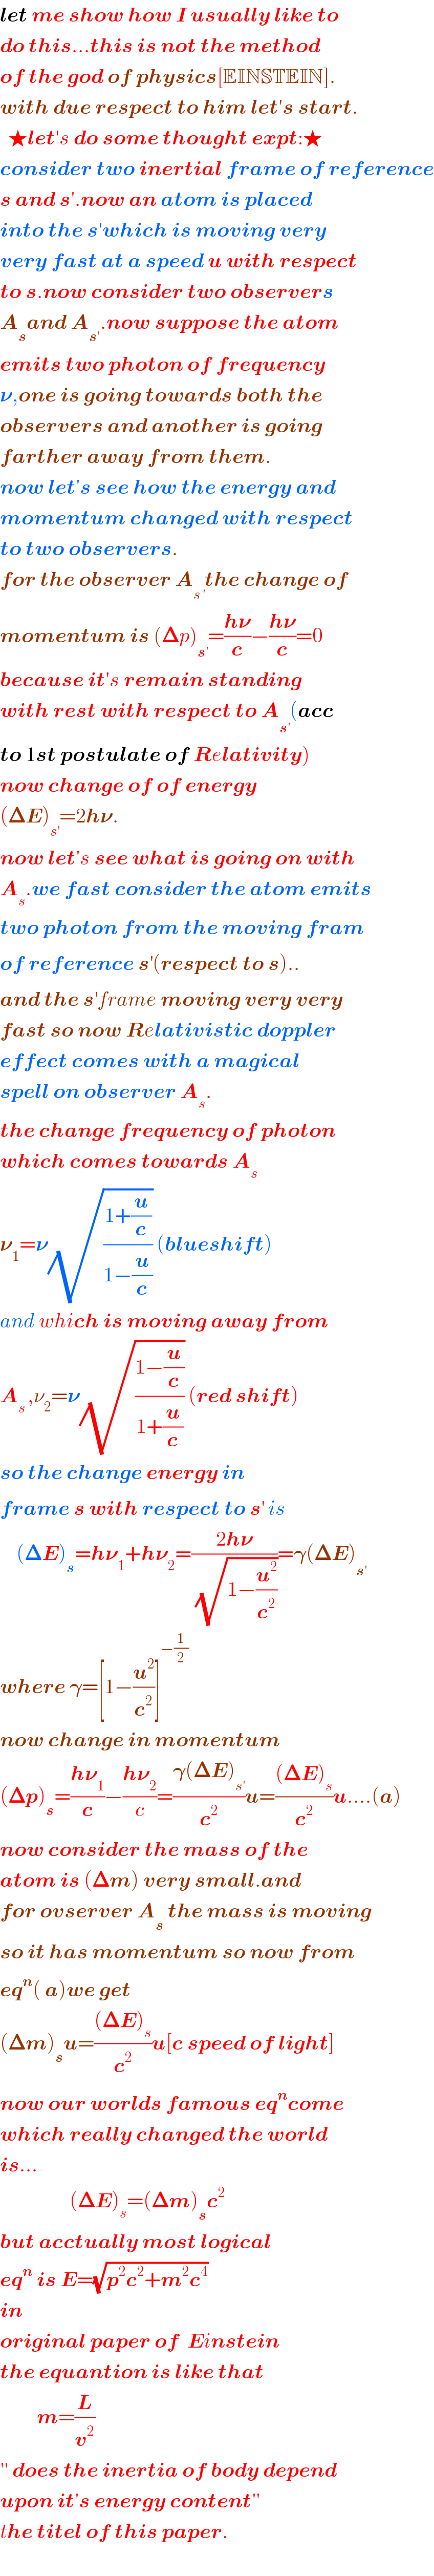 let me show how I usually like to  do this...this is not the method   of the god of physics[EINSTEIN].  with due respect to him let′s start.    ★let′s do some thought expt:★  consider two inertial frame of reference  s and s′.now an atom is placed   into the s′which is moving very   very fast at a speed u with respect  to s.now consider two observers  A_s and A_(s′) .now suppose the atom  emits two photon of frequency  𝛎,one is going towards both the  observers and another is going  farther away from them.  now let′s see how the energy and  momentum changed with respect  to two observers.  for the observer A_(s^′ ) the change of  momentum is (𝚫p)_s^′  =((h𝛎)/c)−((h𝛎)/c)=0  because it′s remain standing   with rest with respect to A_s^′  (acc  to 1st postulate of Relativity)  now change of of energy  (𝚫E)_s^′  =2h𝛎.  now let′s see what is going on with  A_s .we fast consider the atom emits  two photon from the moving fram  of reference s^′ (respect to s)..  and the s^′ frame moving very very  fast so now Relativistic doppler  effect comes with a magical  spell on observer A_s .  the change frequency of photon  which comes towards A_s   𝛎_1 =𝛎(√((1+(u/c))/(1−(u/c)))) (blueshift)  and which is moving away from   A_(s ) ,ν_2 =𝛎(√((1−(u/c))/(1+(u/c)))) (red shift)  so the change energy in  frame s with respect to s^′  is      (𝚫E)_s =h𝛎_1 +h𝛎_2 =((2h𝛎)/(√(1−(u^2 /c^2 ))))=𝛄(𝚫E)_s^′    where 𝛄=[1−(u^2 /c^2 )]^(−(1/2))   now change in momentum  (𝚫p)_s =((h𝛎_1 )/c)−((h𝛎_2 )/c)=((𝛄(𝚫E)_s^′  )/c^2 )u=(((𝚫E)_s )/c^2 )u....(a)  now consider the mass of the   atom is (𝚫m) very small.and  for ovserver A_s  the mass is moving  so it has momentum so now from  eq^n ( a)we get  (𝚫m)_s u=(((𝚫E)_s )/c^2 )u[c speed of light]  now our worlds famous eq^n come  which really changed the world  is...                   (𝚫E)_s =(𝚫m)_s c^2   but acctually most logical  eq^n  is E=(√(p^2 c^2 +m^2 c^4 ))  in  original paper of  Einstein  the equantion is like that           m=(L/v^2 )   ′′ does the inertia of body depend  upon it′s energy content′′  the titel of this paper.    